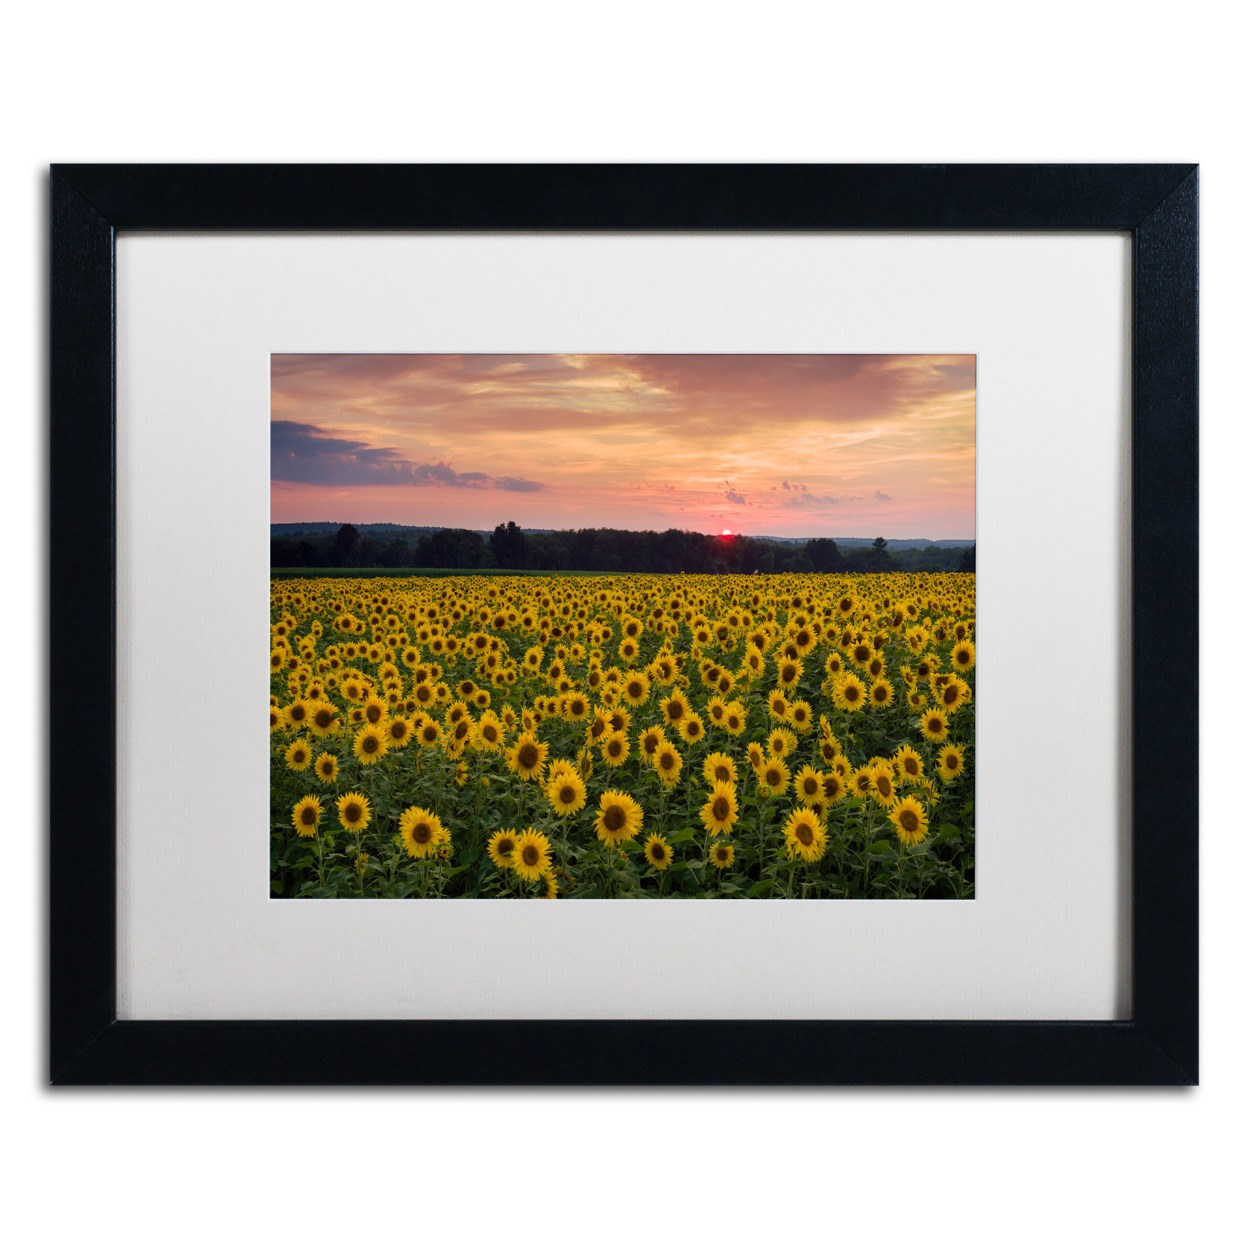 Michael Blanchette Photography 'Sunflower Taps' Black Wooden Framed Art 18 X 22 Inches